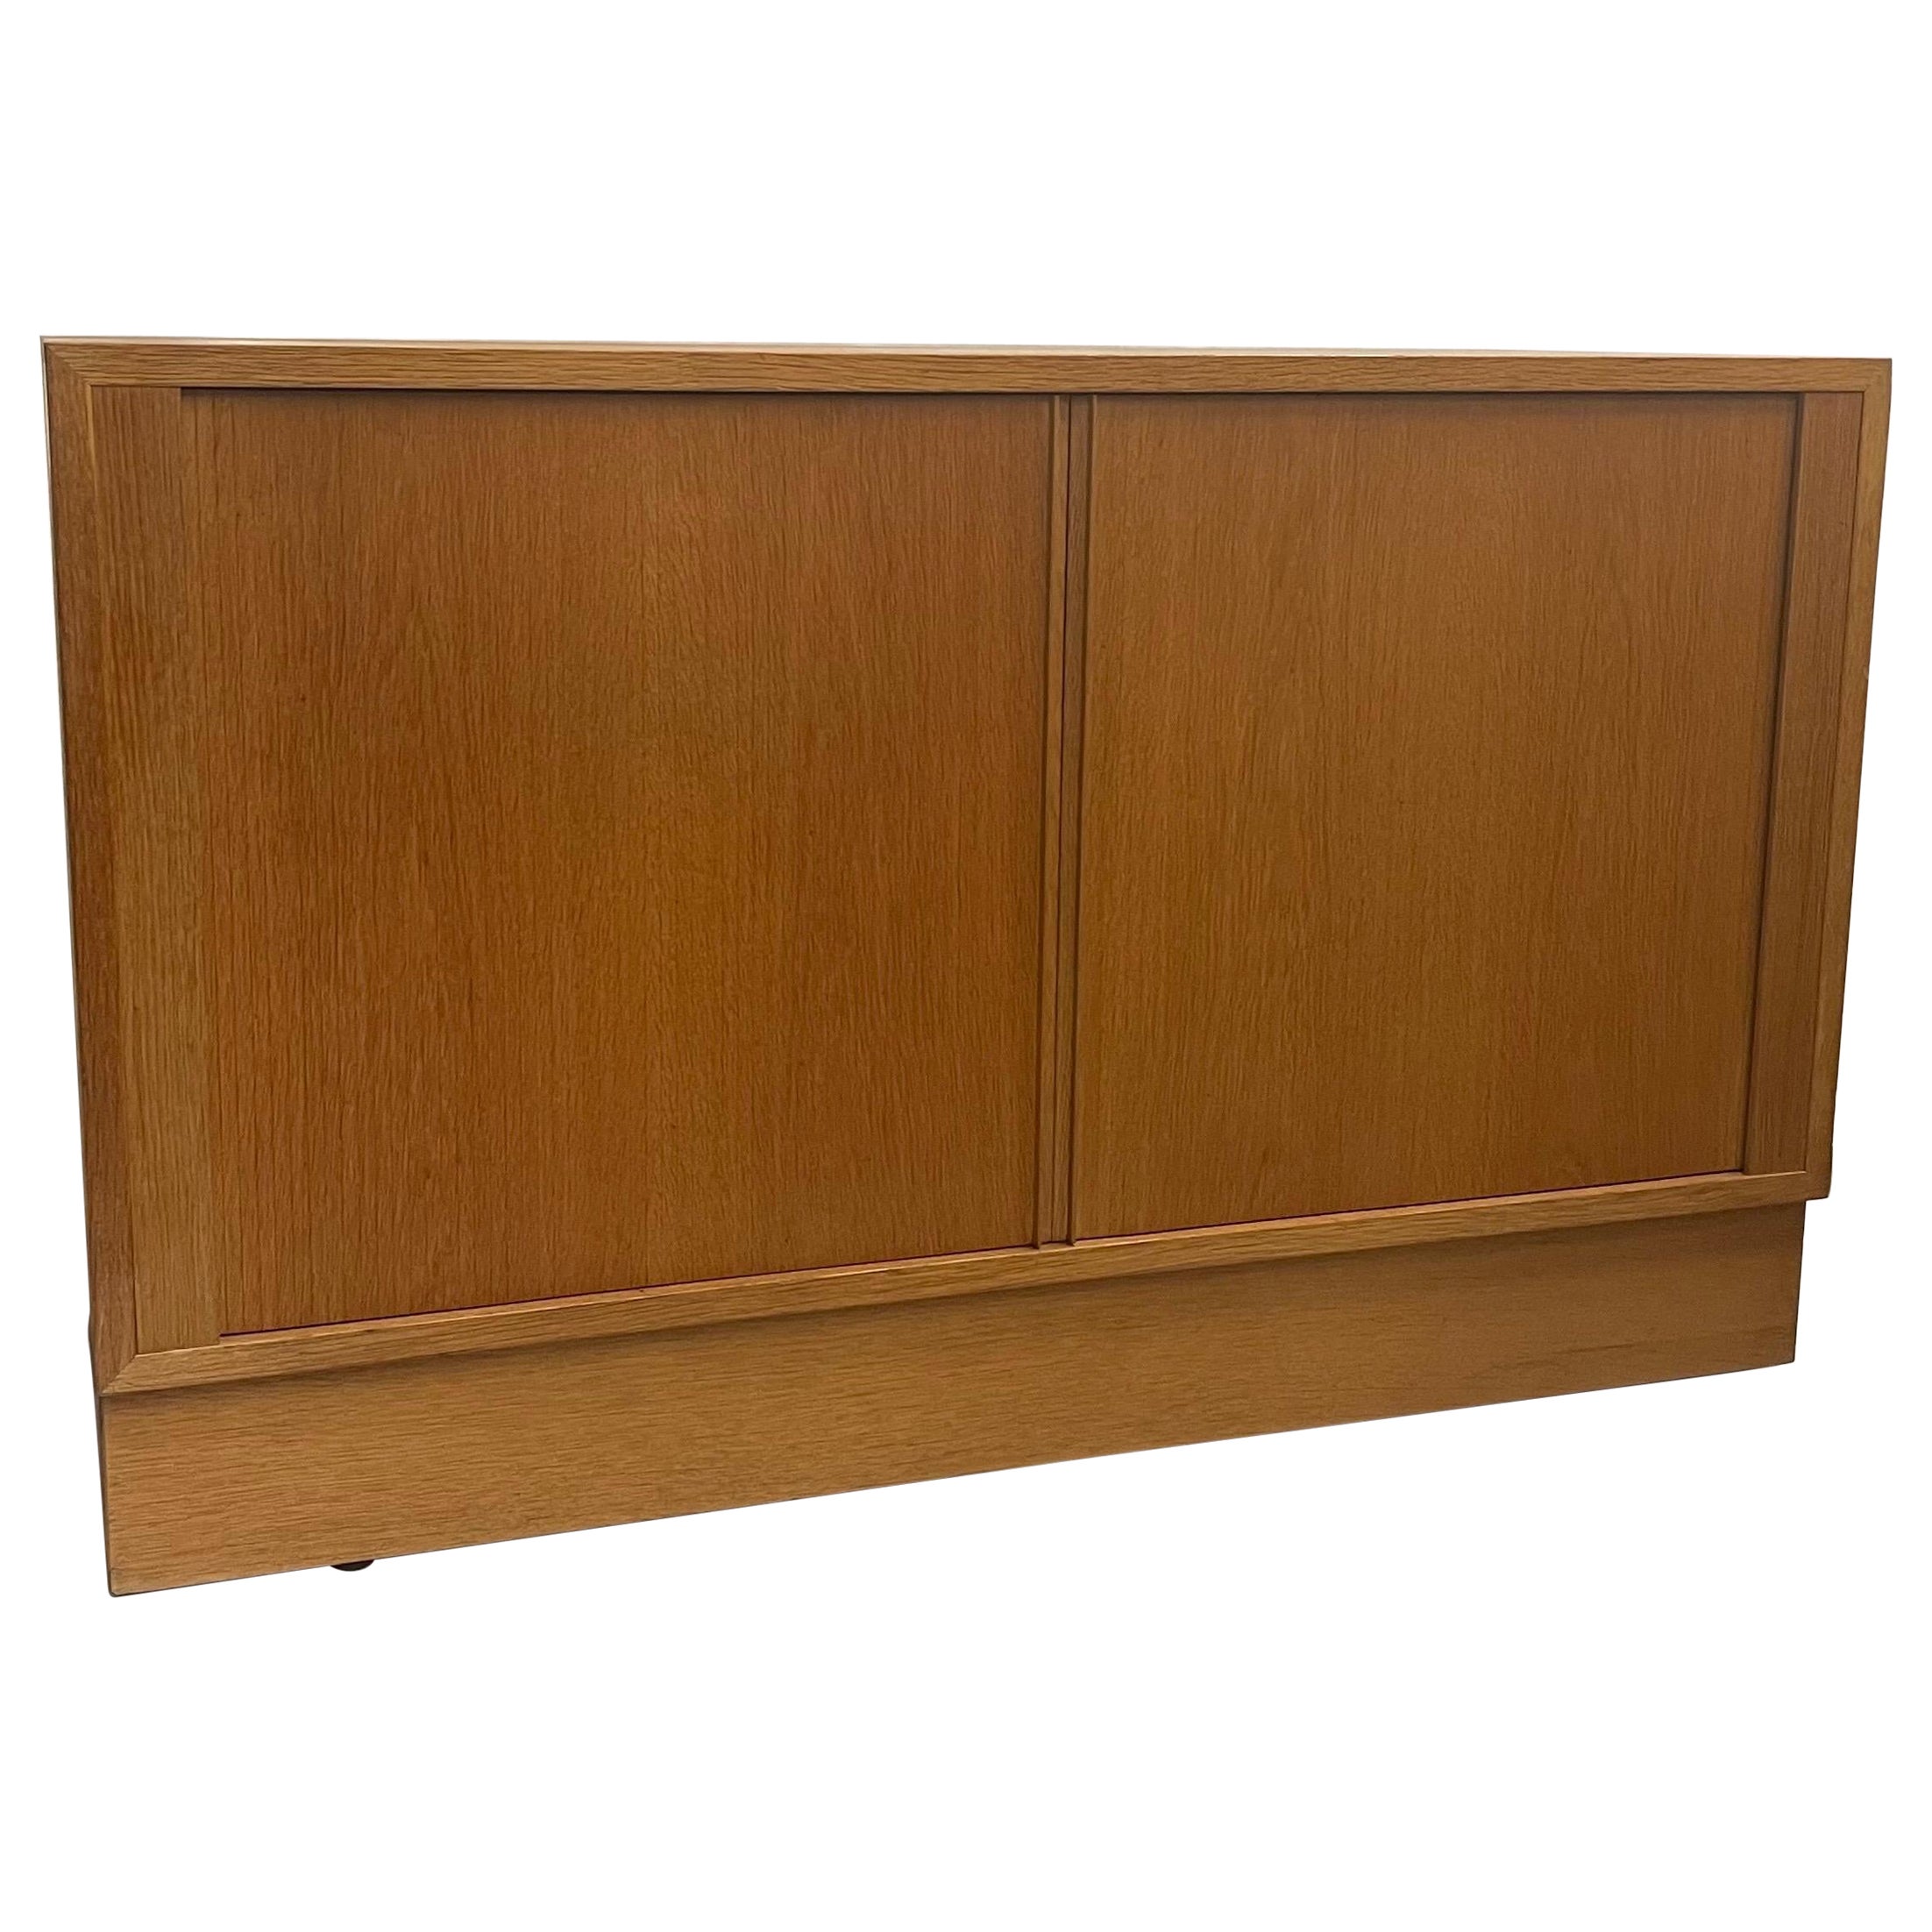 Vintage Danish Modern Oak Credenza or Record Cabinet with Tambour Doors For Sale